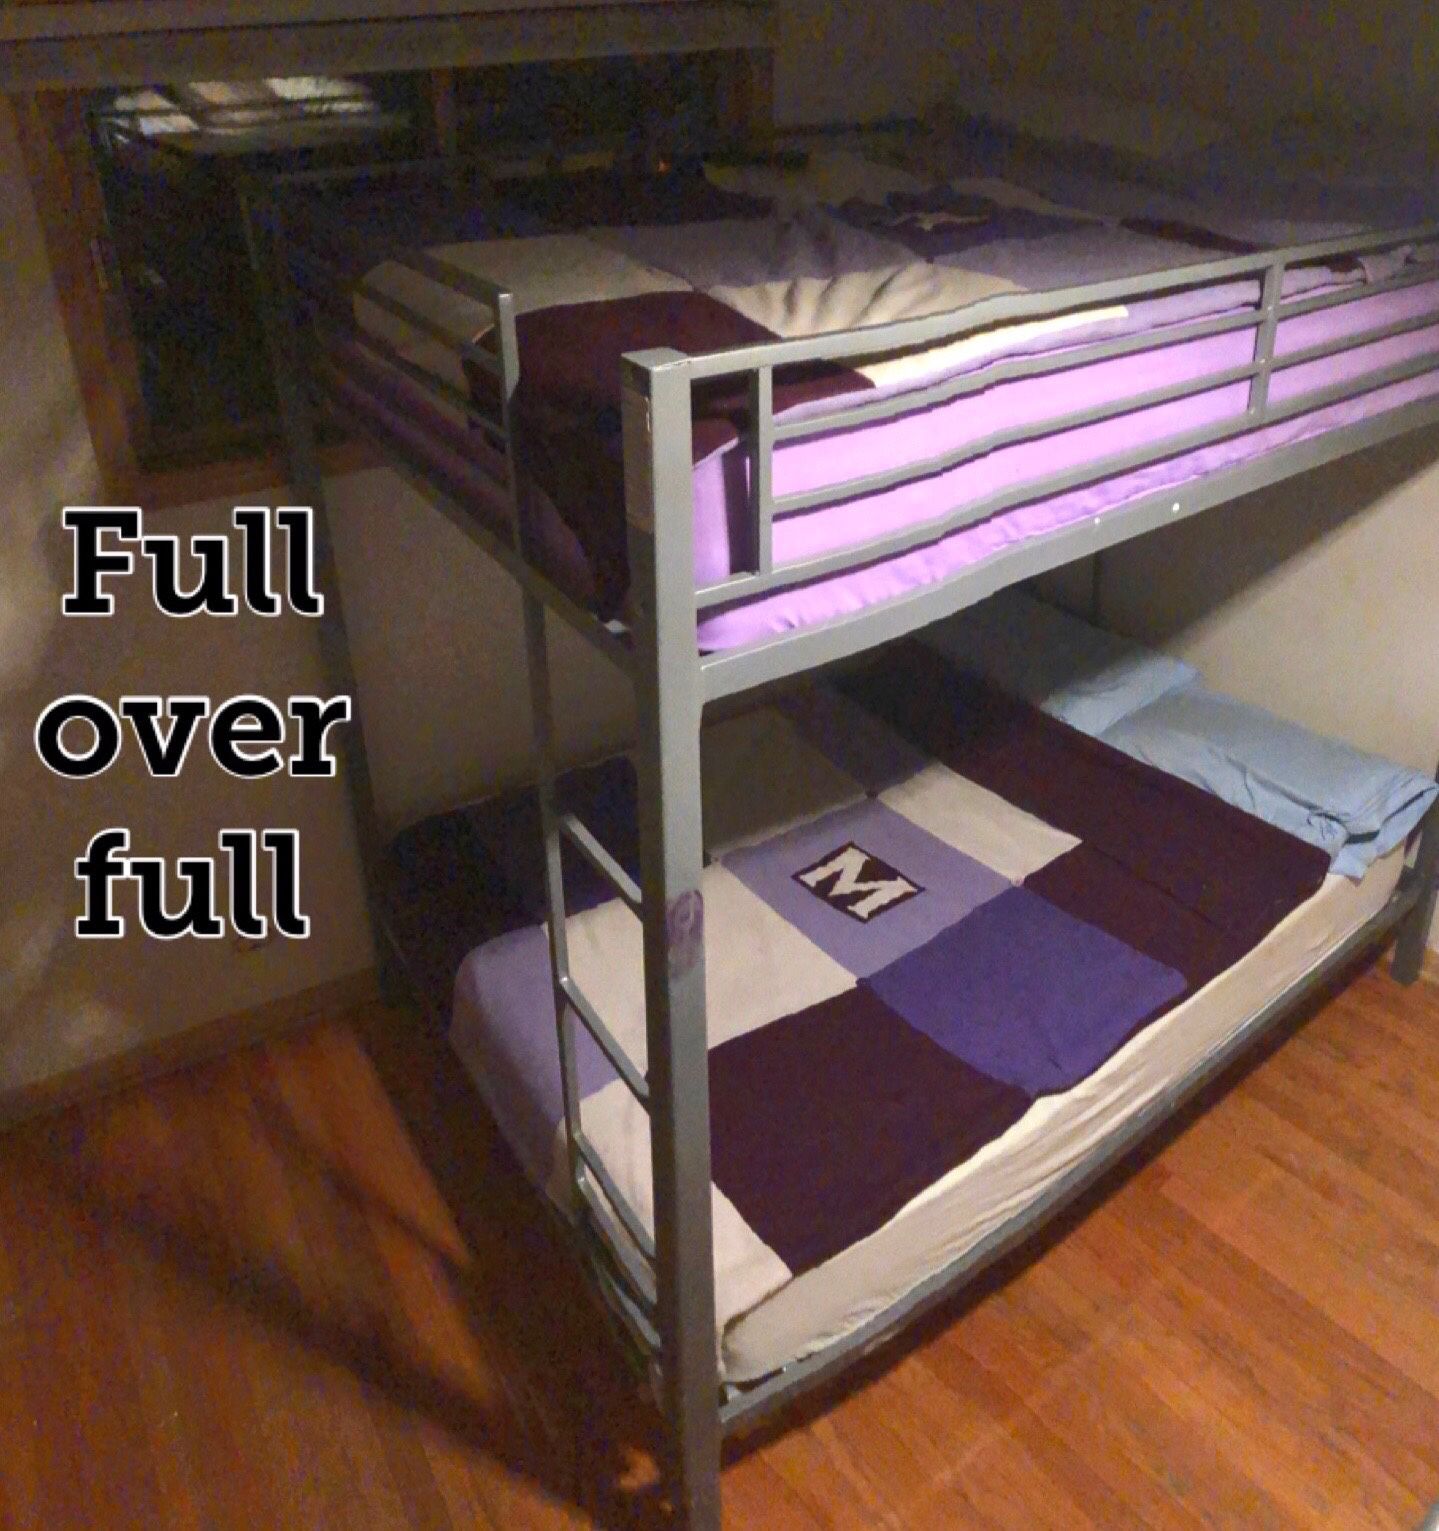 Full over full bunk beds with mattresses